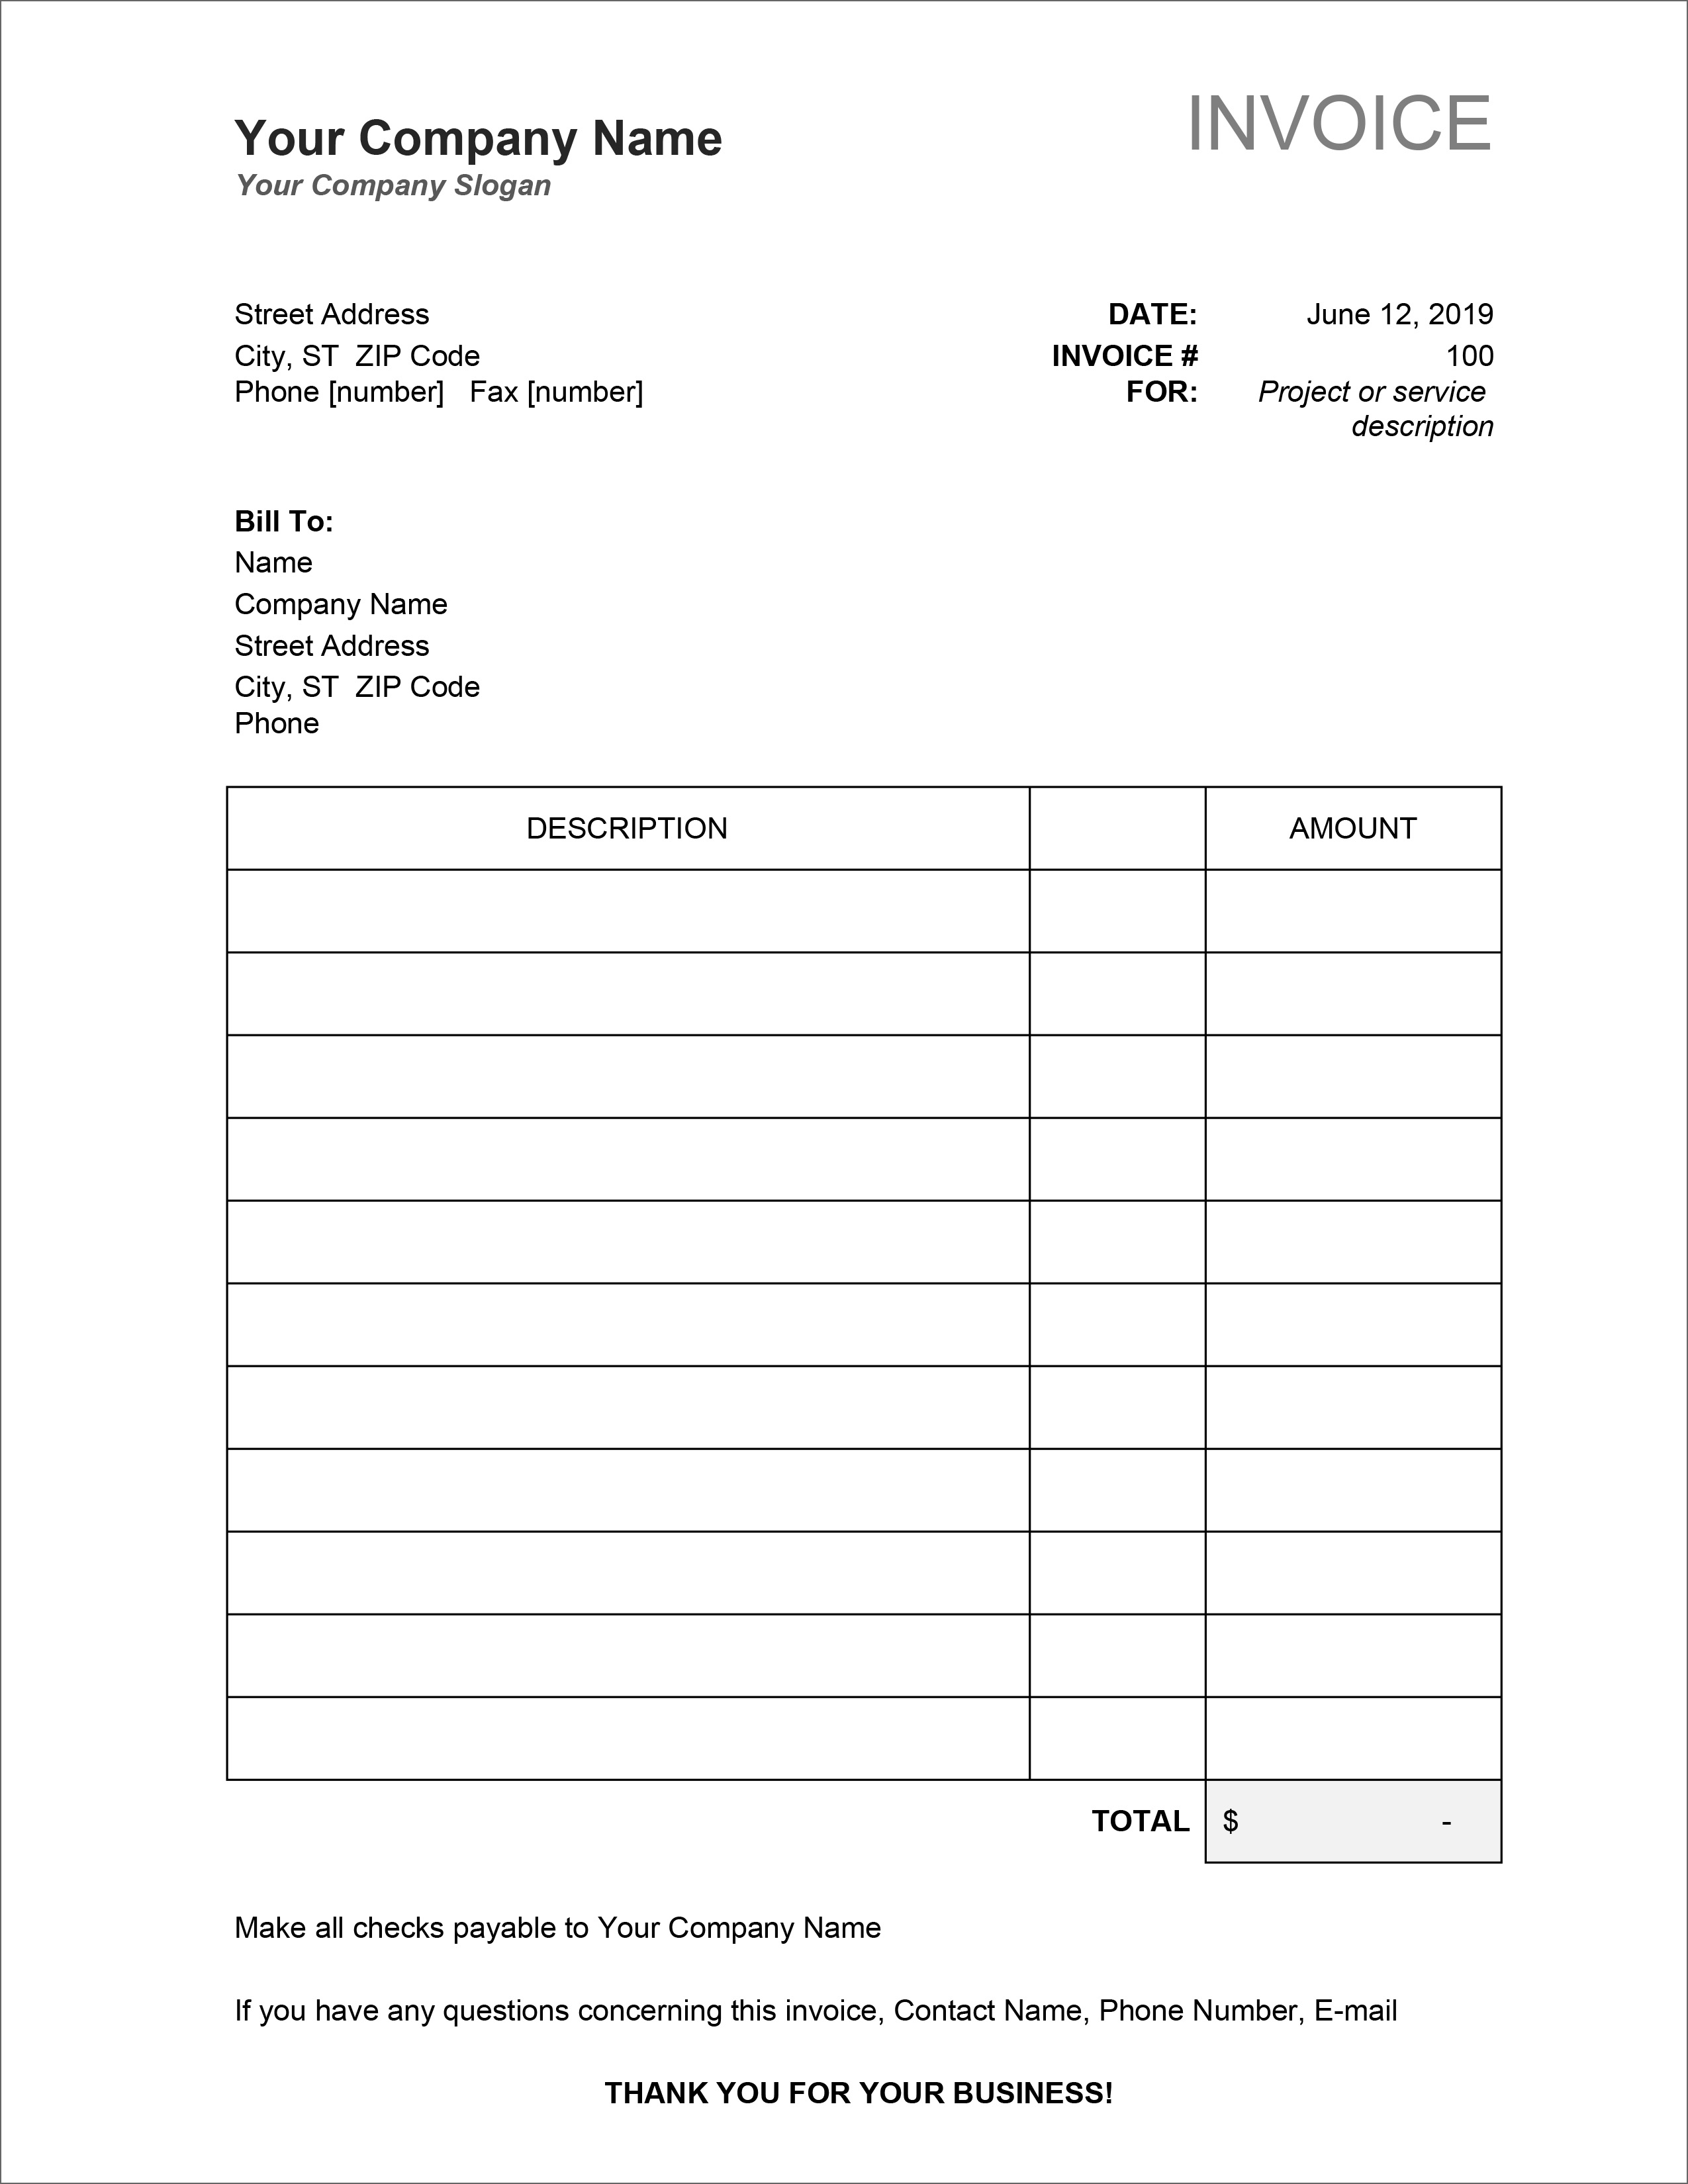 23 Free Invoice Templates In Microsoft Excel And DOCX Formats Inside Free Business Invoice Template Downloads